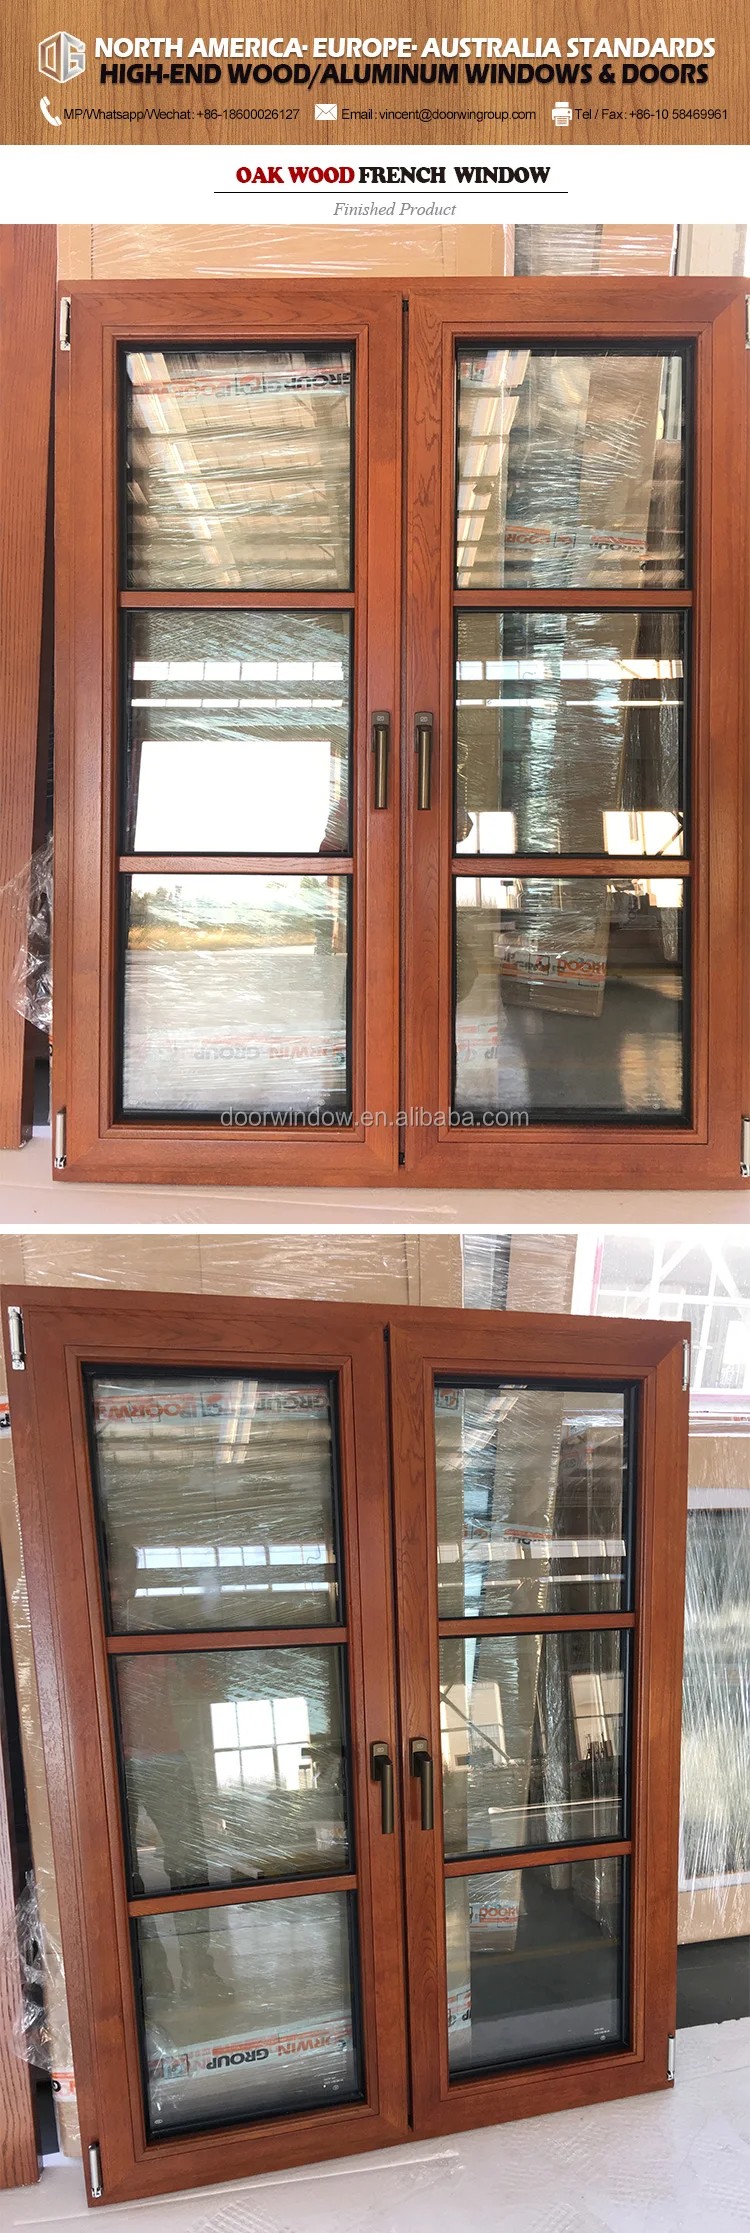 Good Price safety bars for inside windows